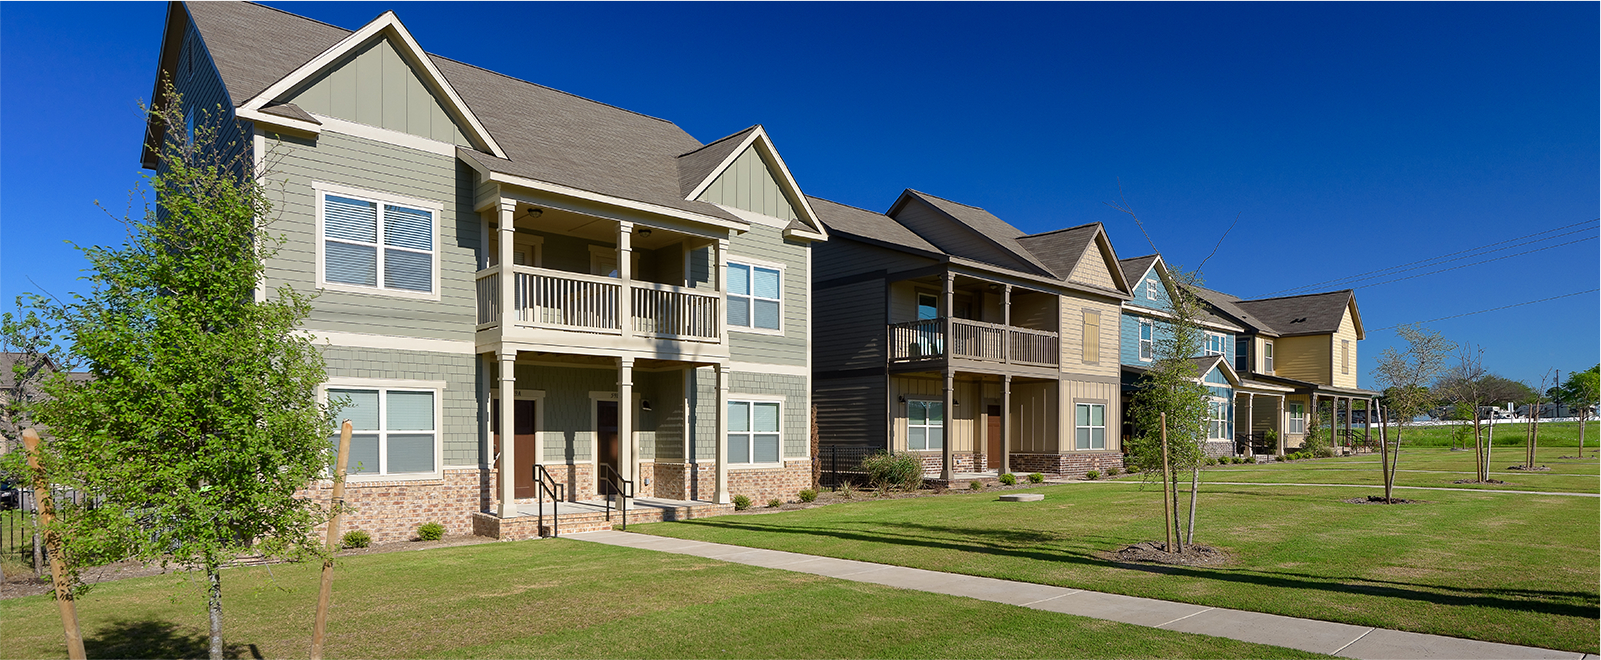 Exterior of our housing communities